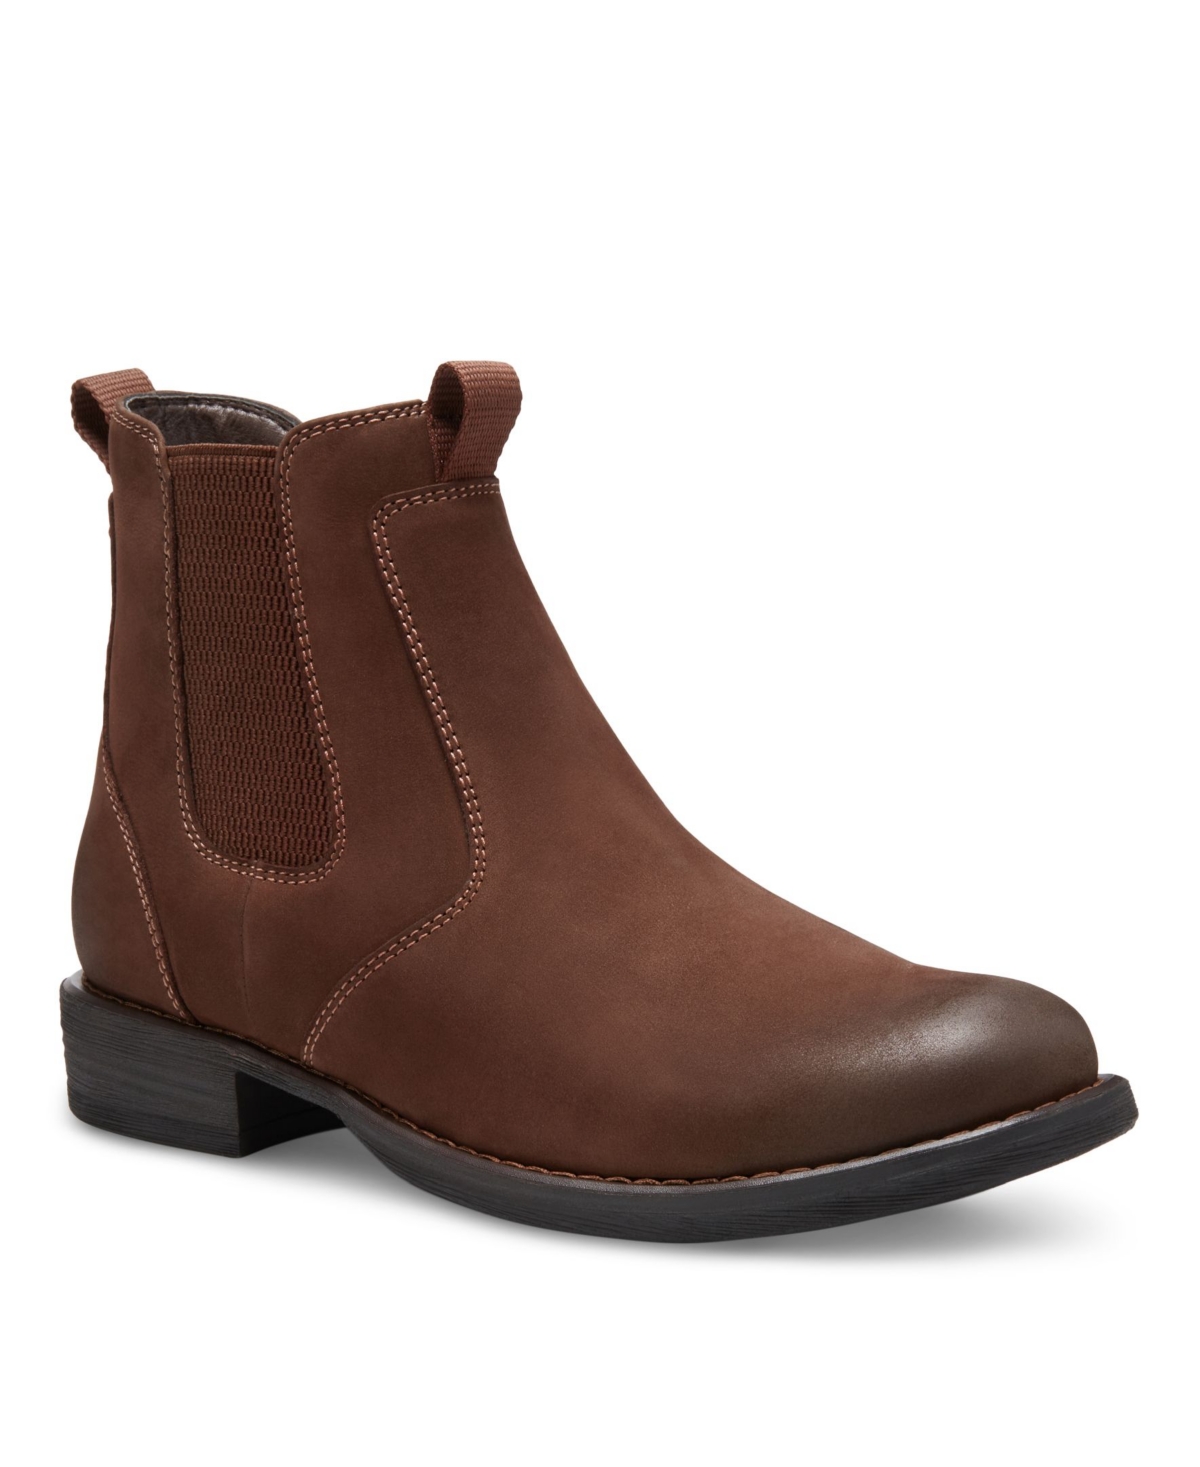 Men's Daily Double Chelsea Boots - Brown Nubuck